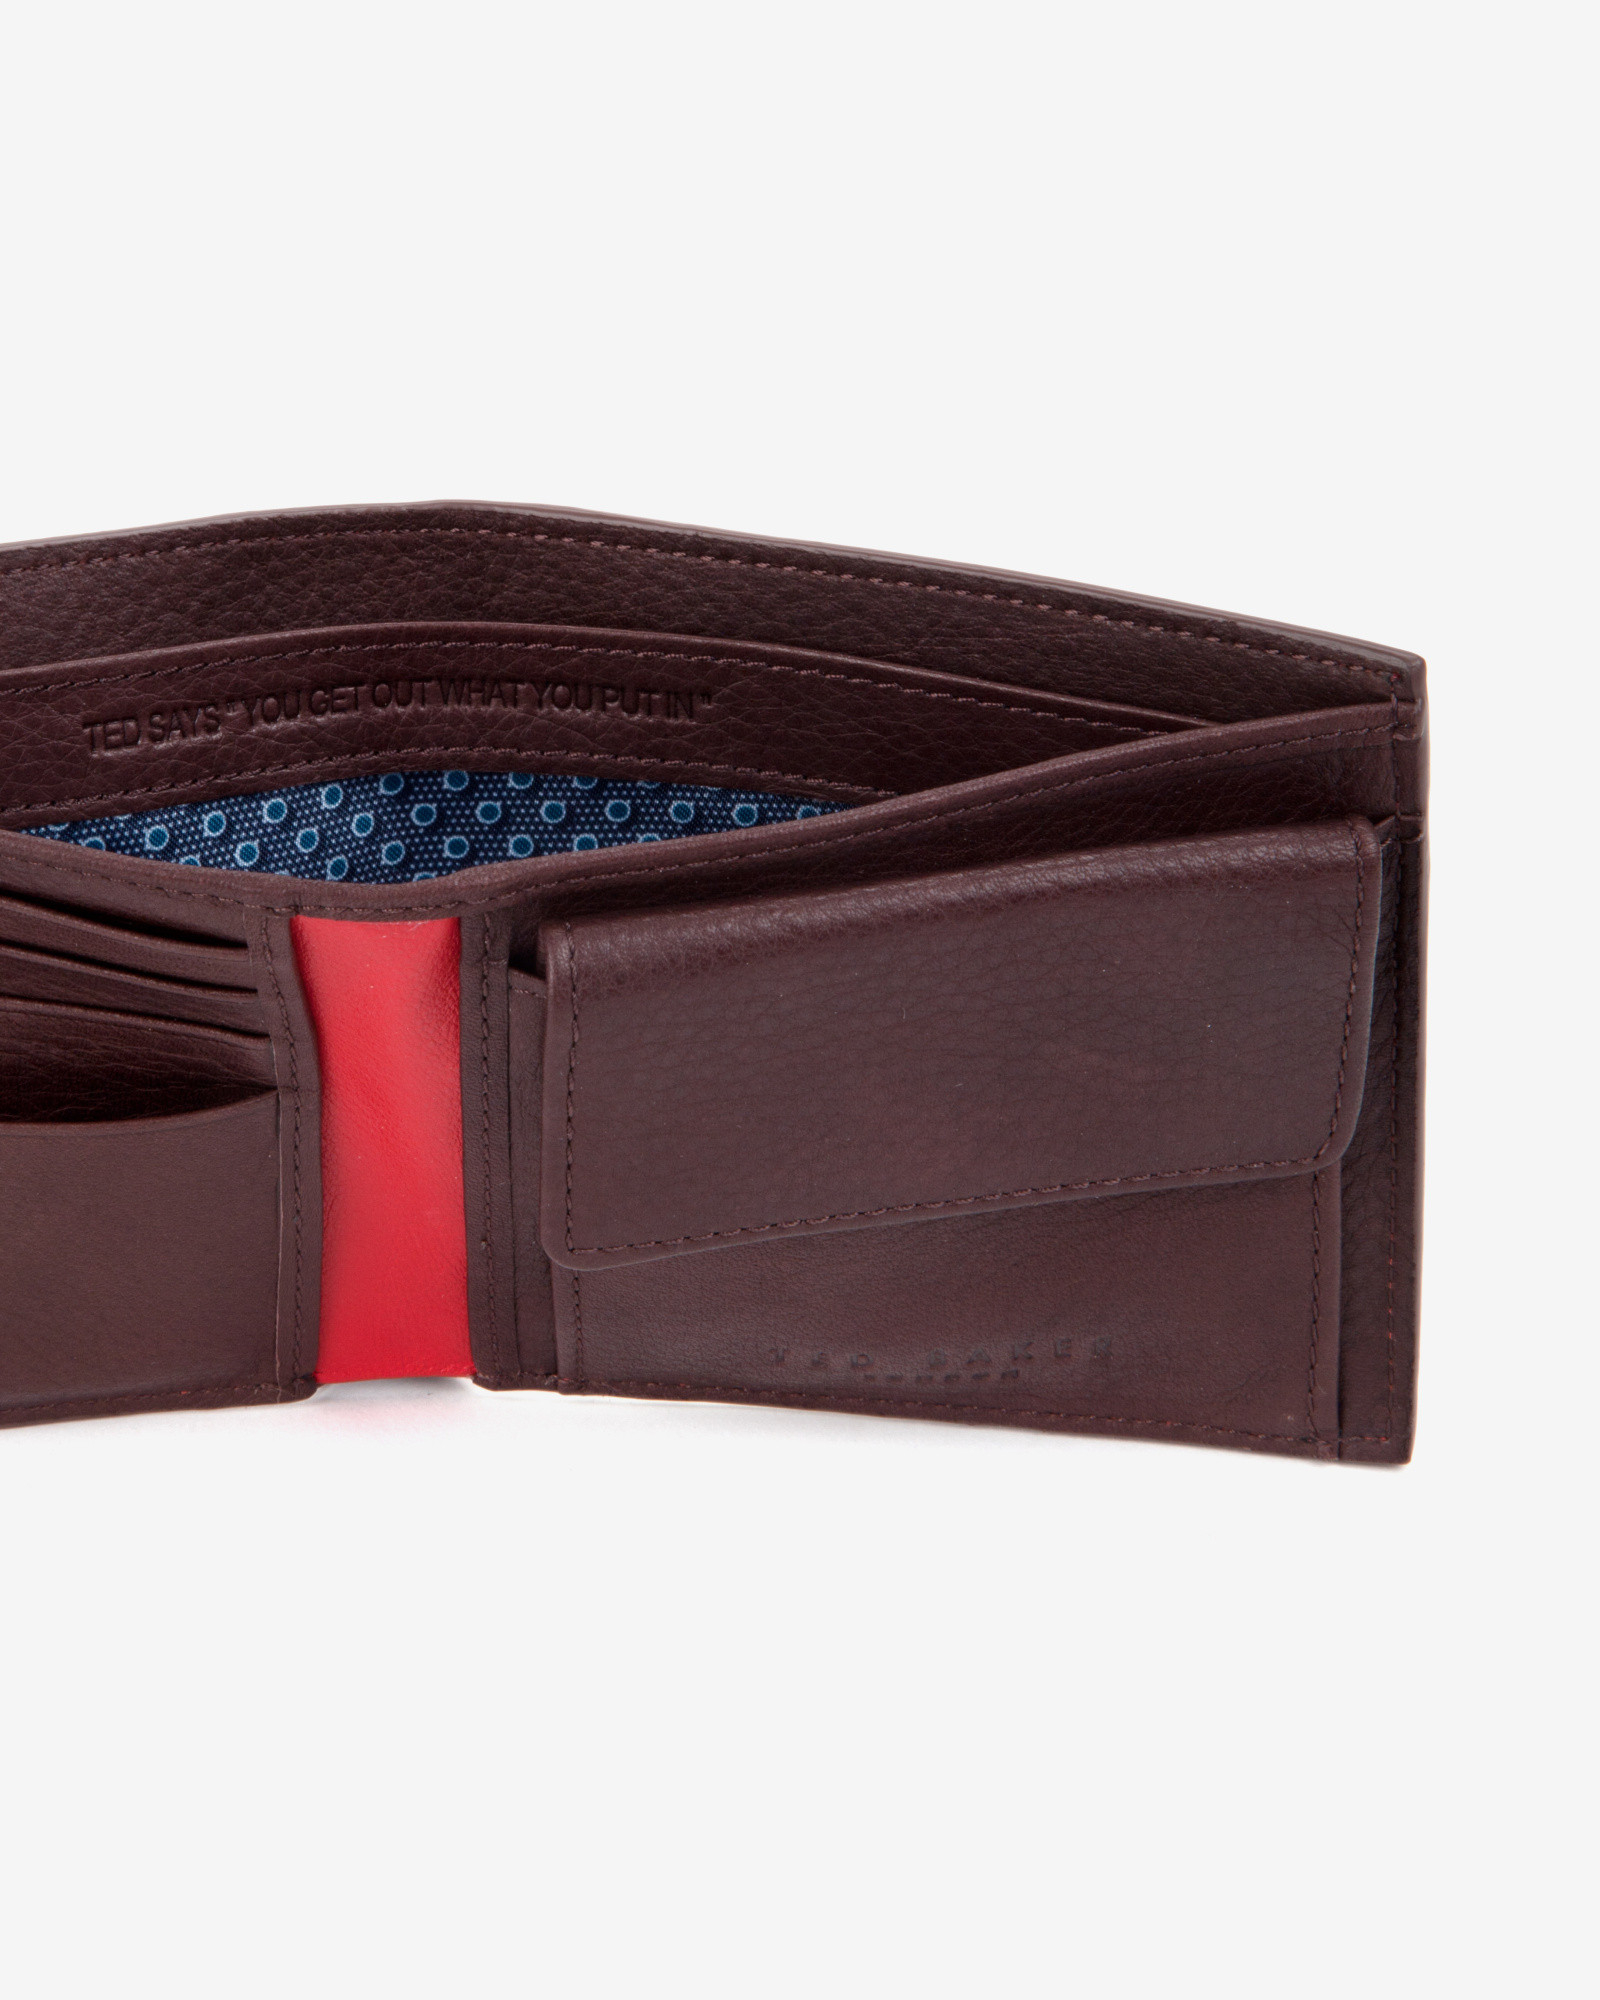 Lyst - Ted Baker Bright Leather Bi-Fold Wallet in Red for Men